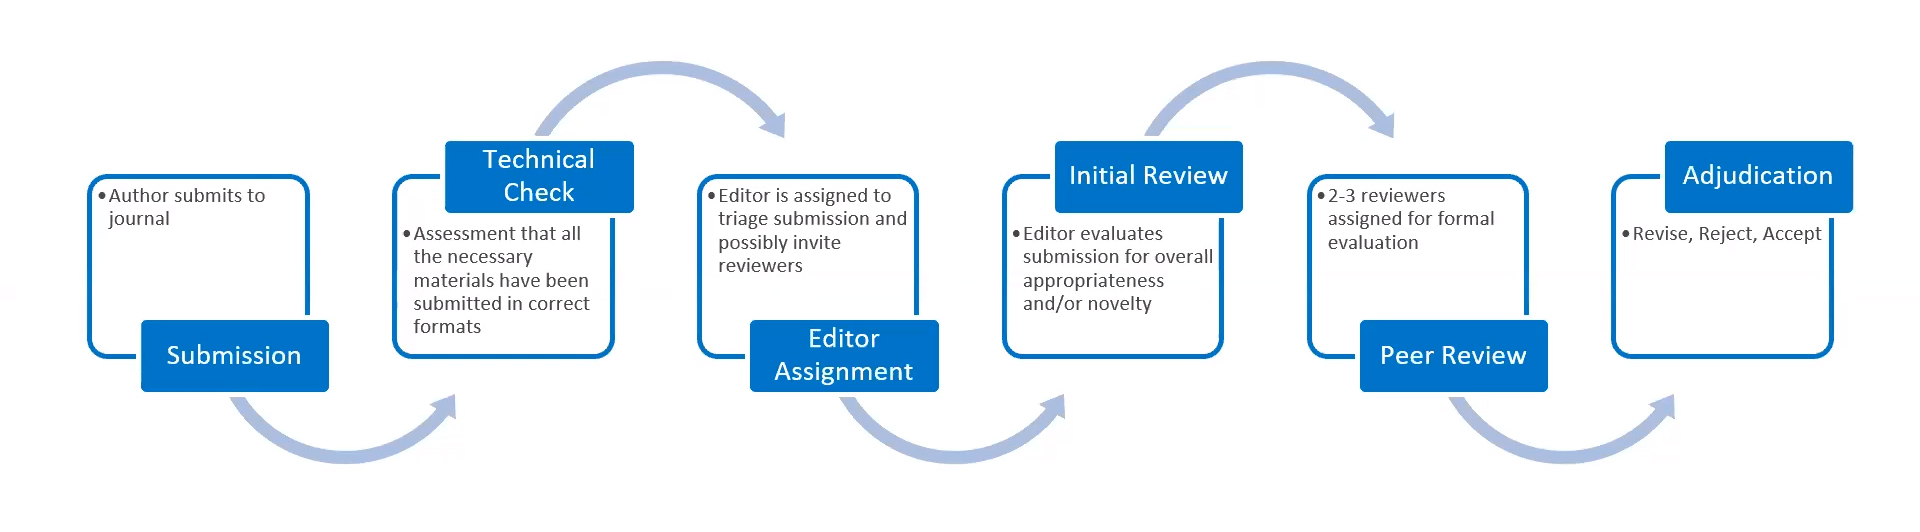 Illustration of typical peer review workflow;  image credit: Duncan MacRae webinar What to expect from the peer review process